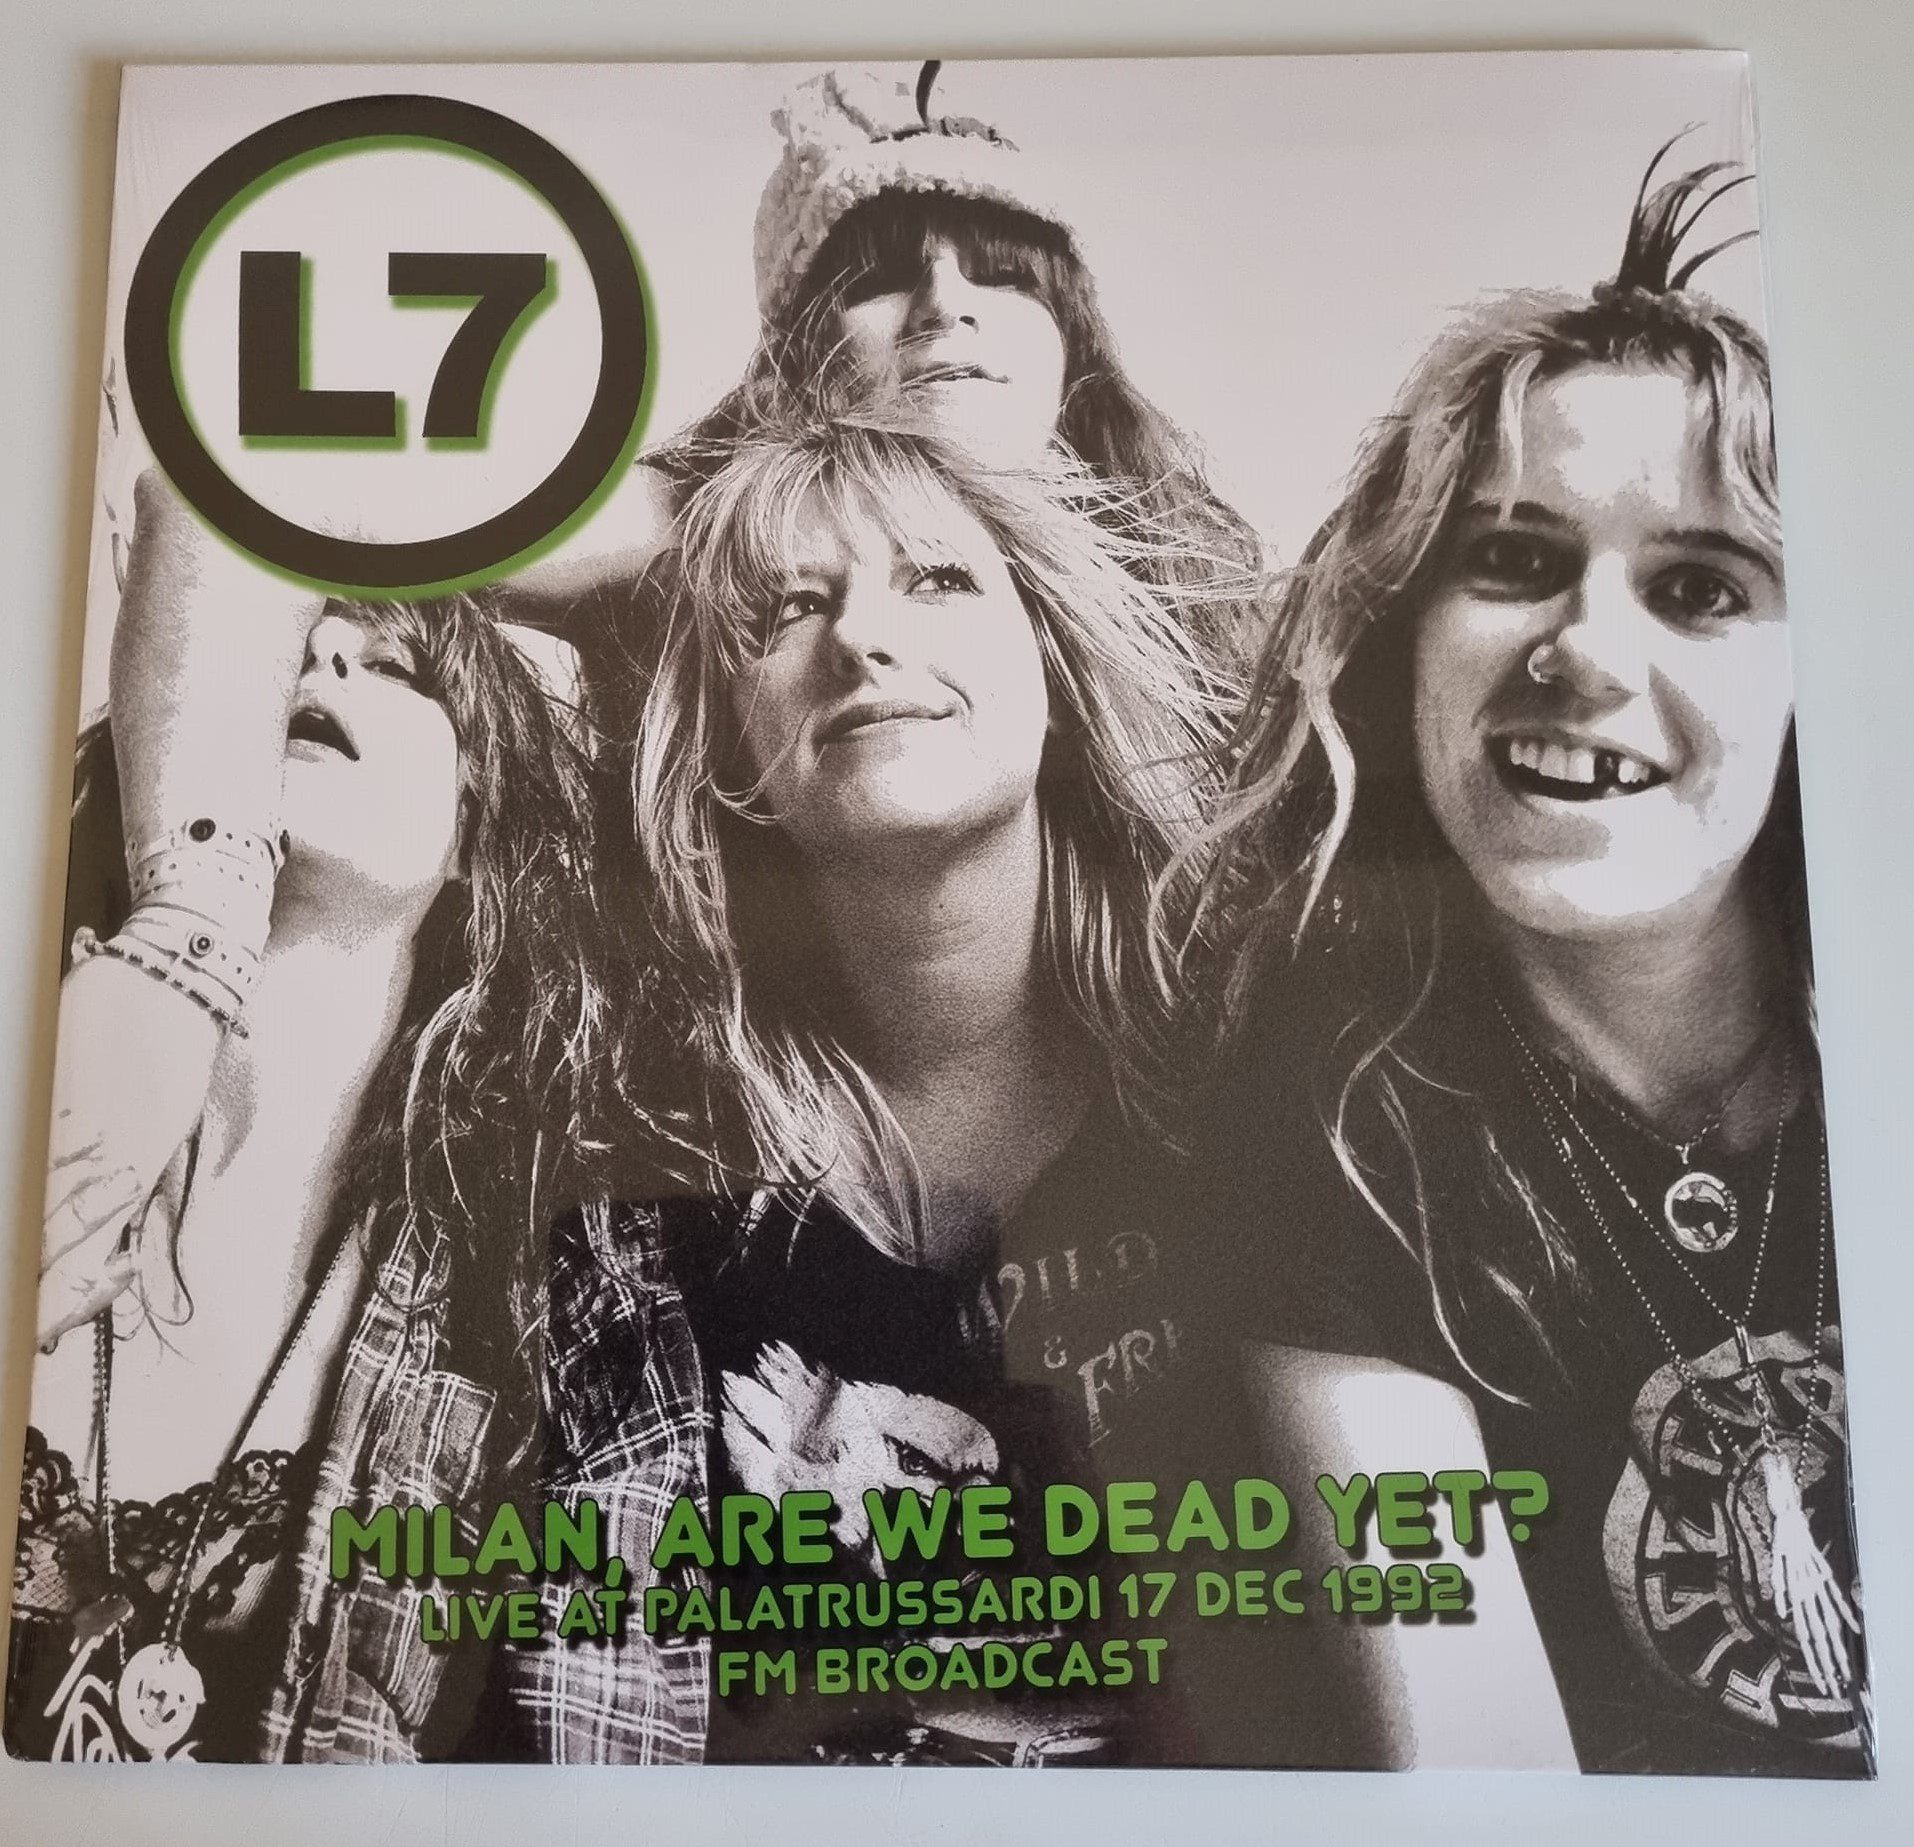 Buy this rare L7 record by clicking here